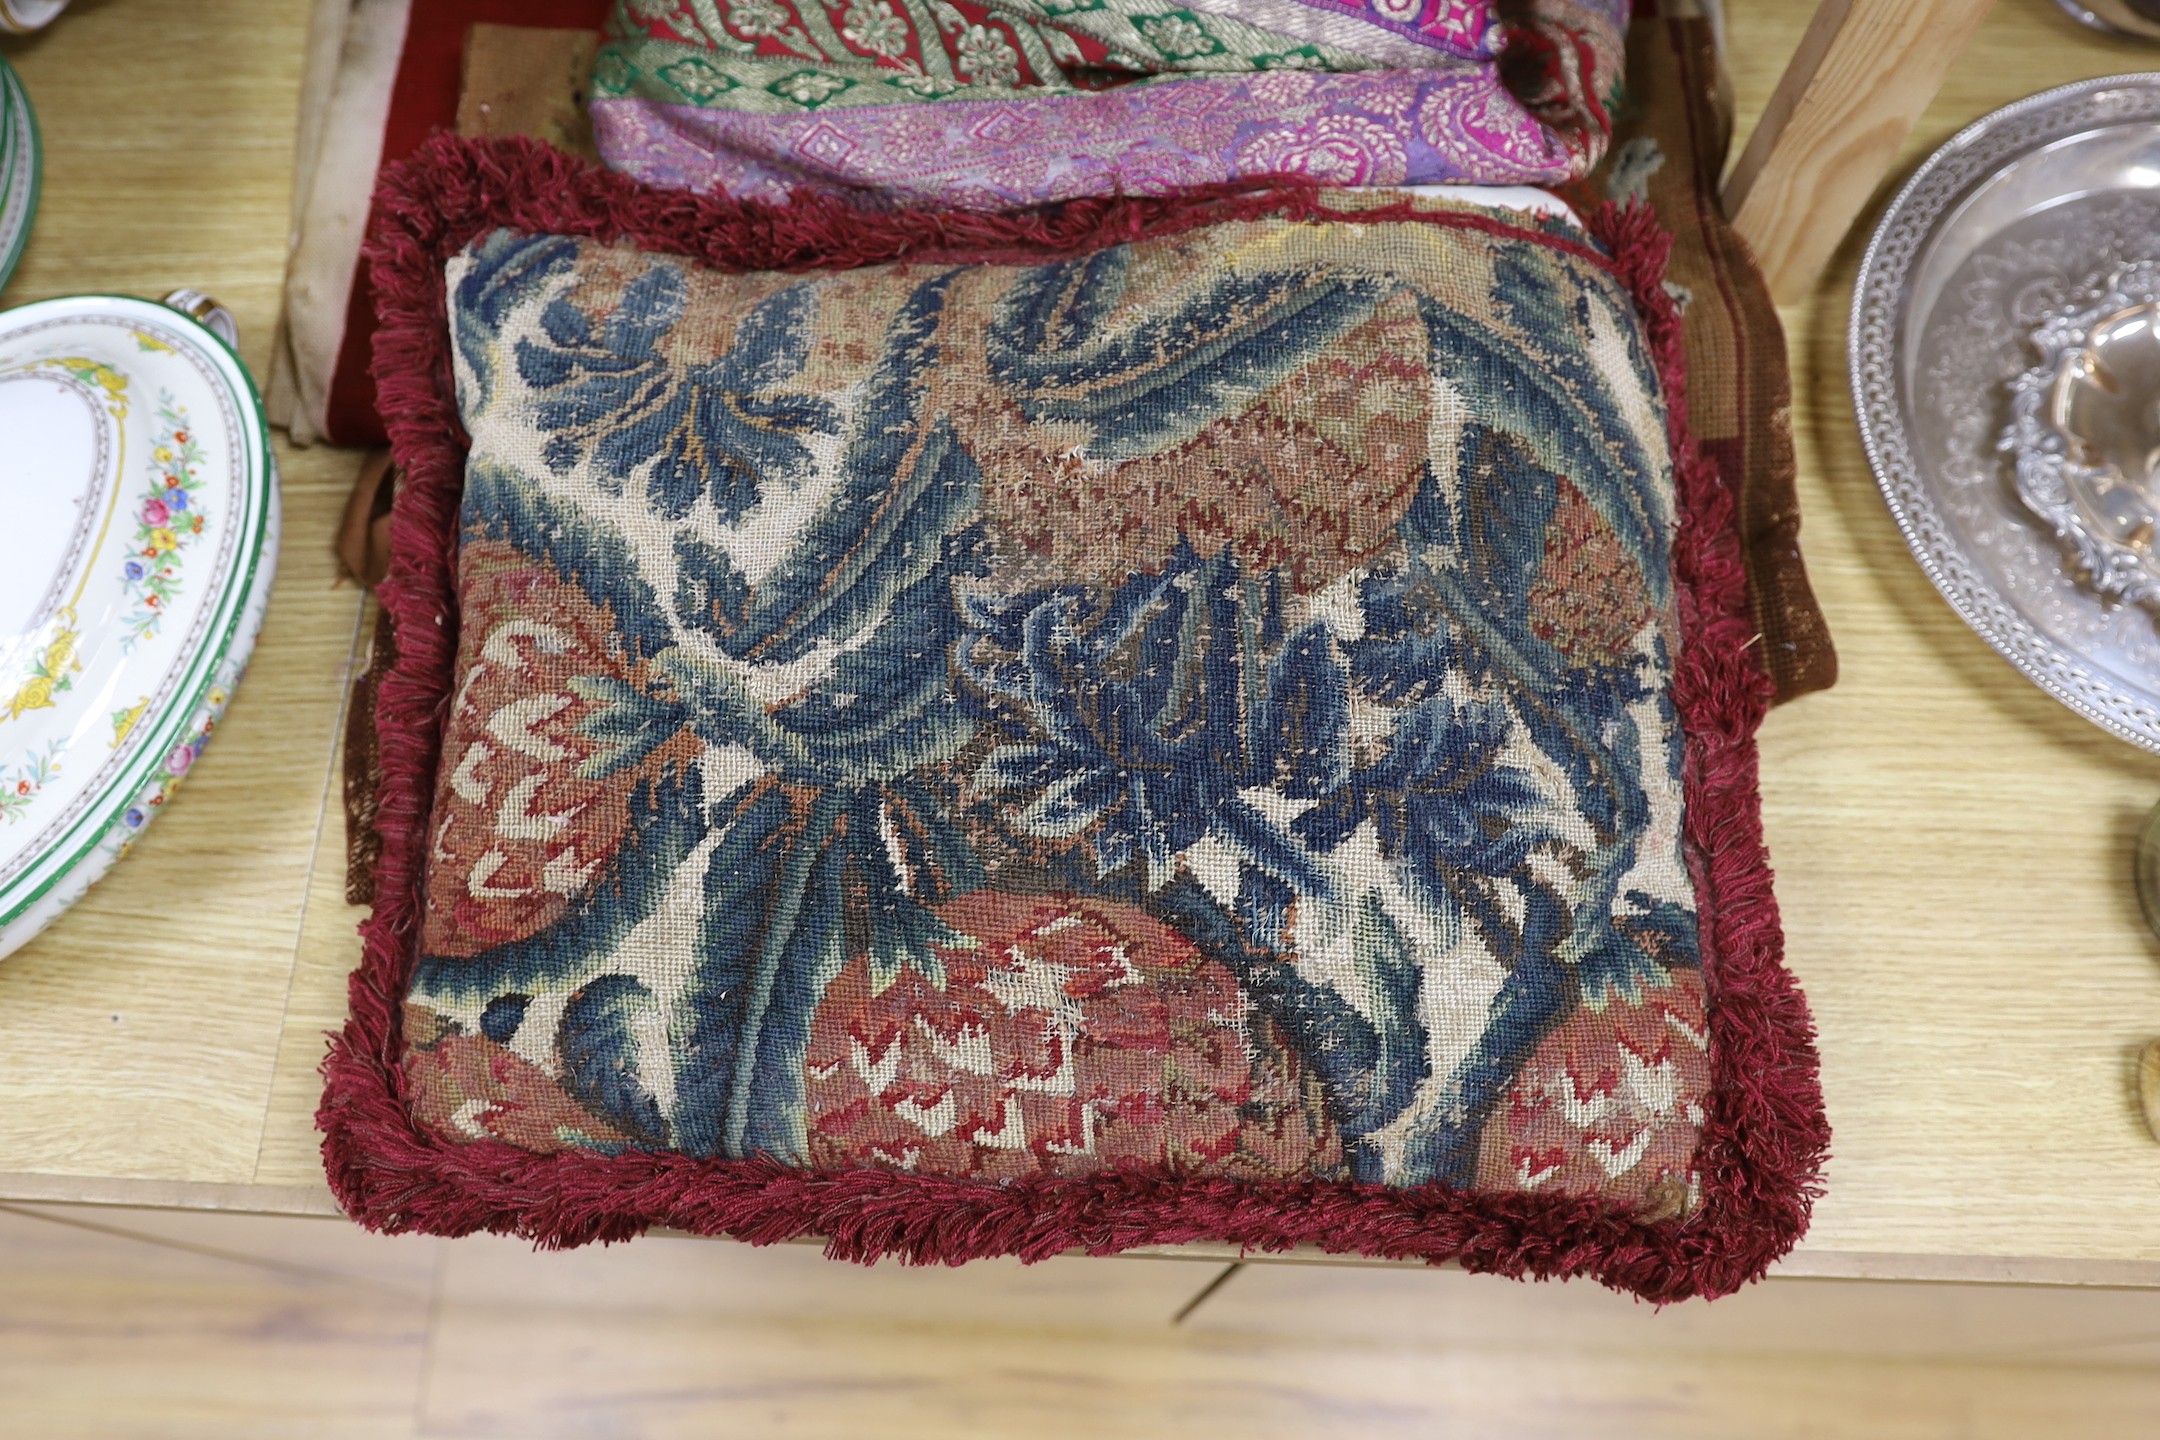 A French 18th century woolwork cushion, 2 chair covers, another panel, a tasselled brocade cushion and an Indian metallic brocaded patchworked cover